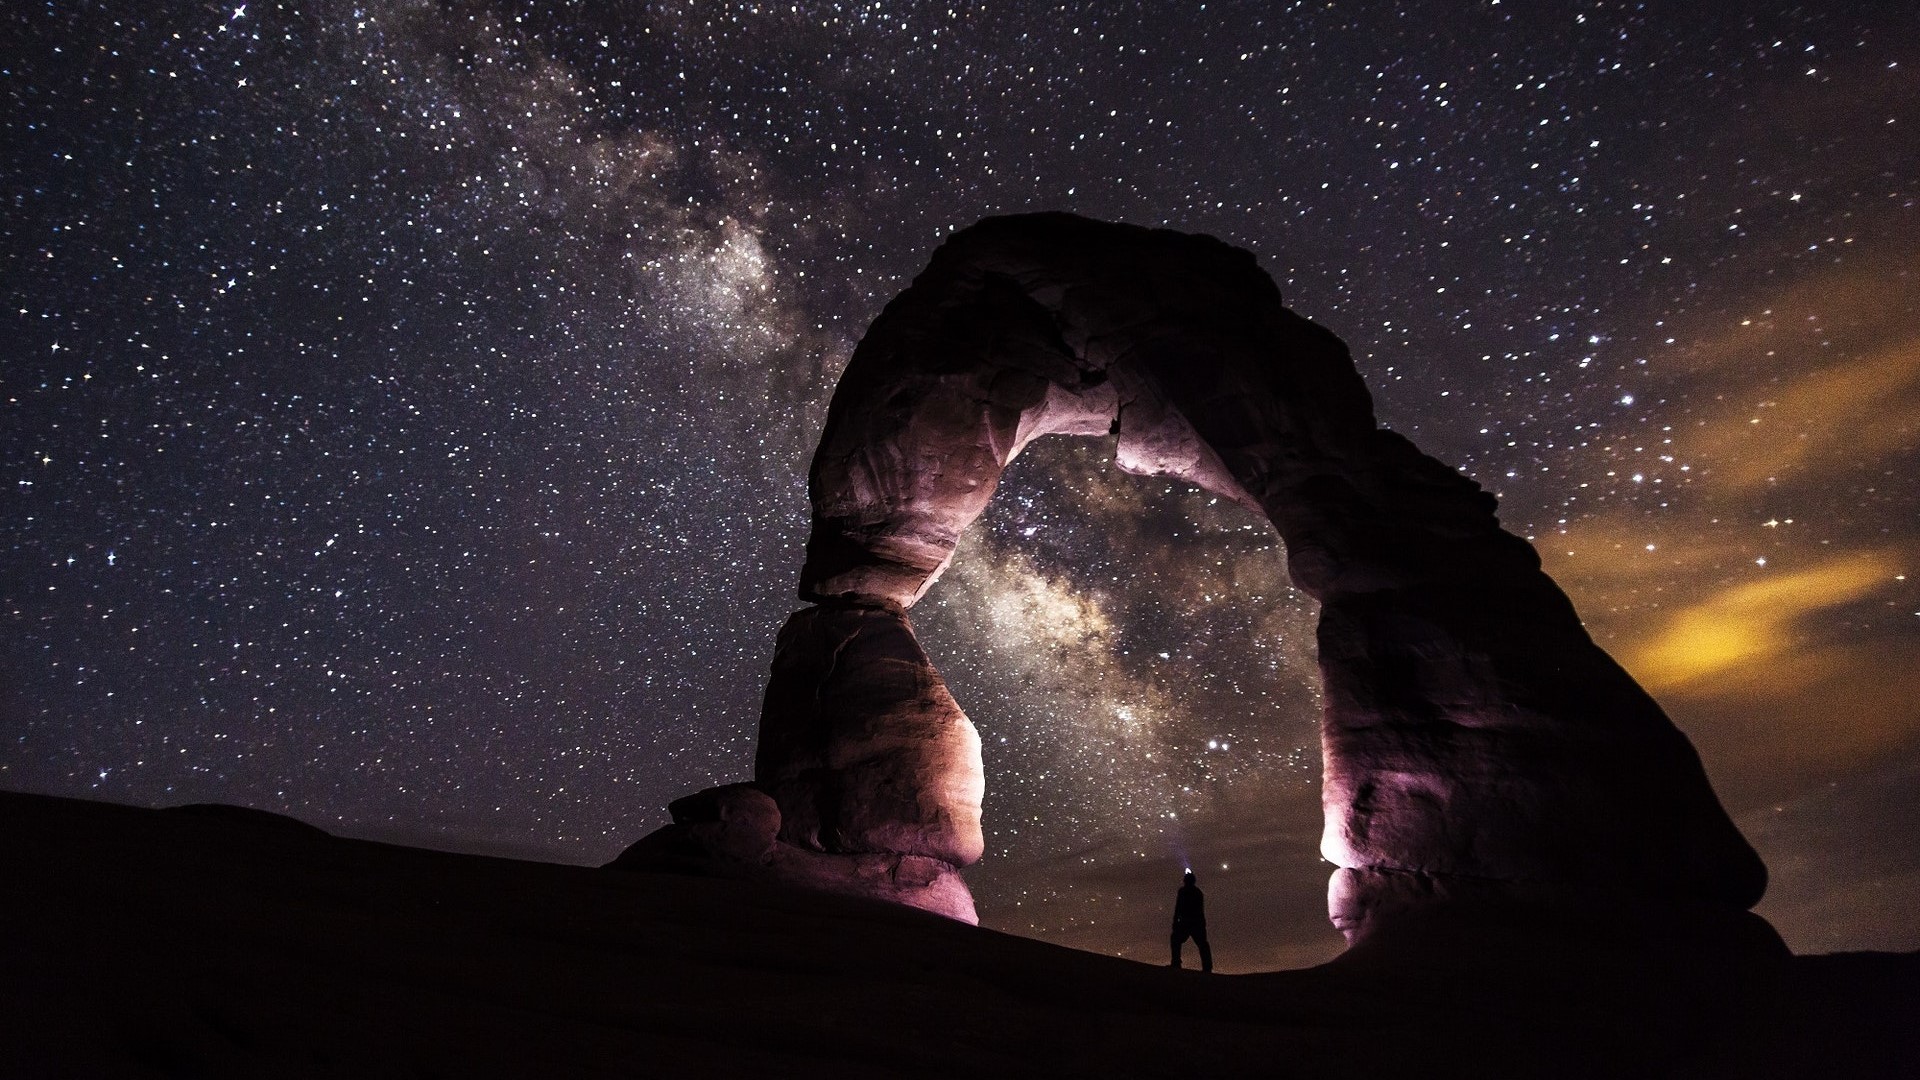 Milky way and large rock